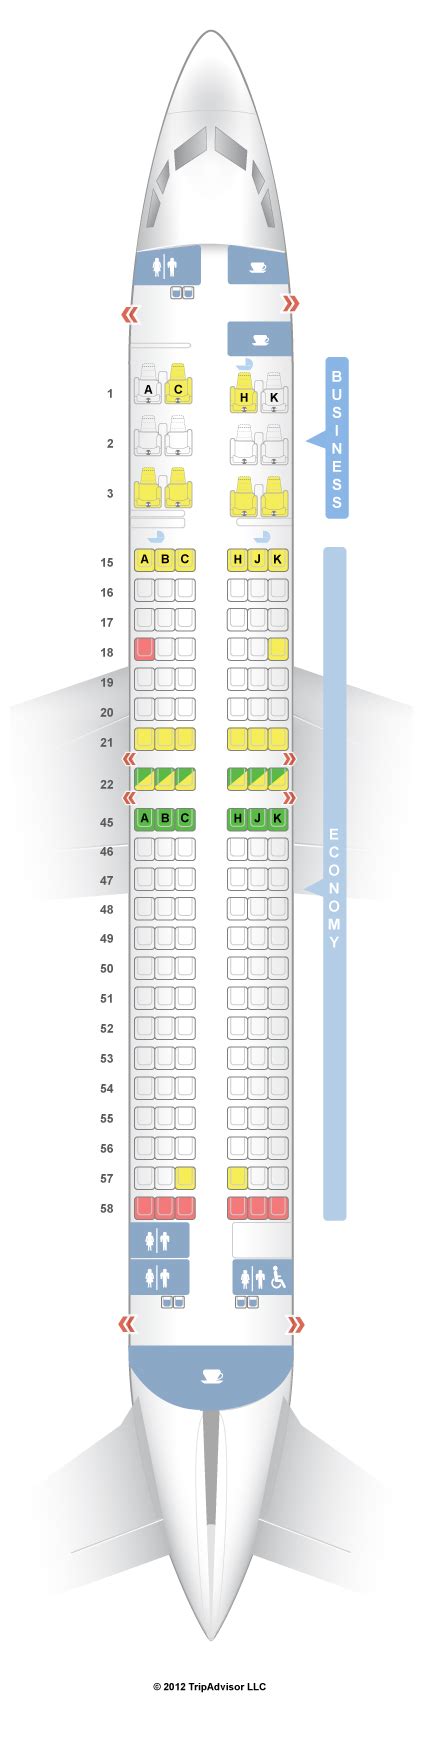 Boeing 737 800 Seating Seat Map Delta Air Lines Boeing B737 800 73h